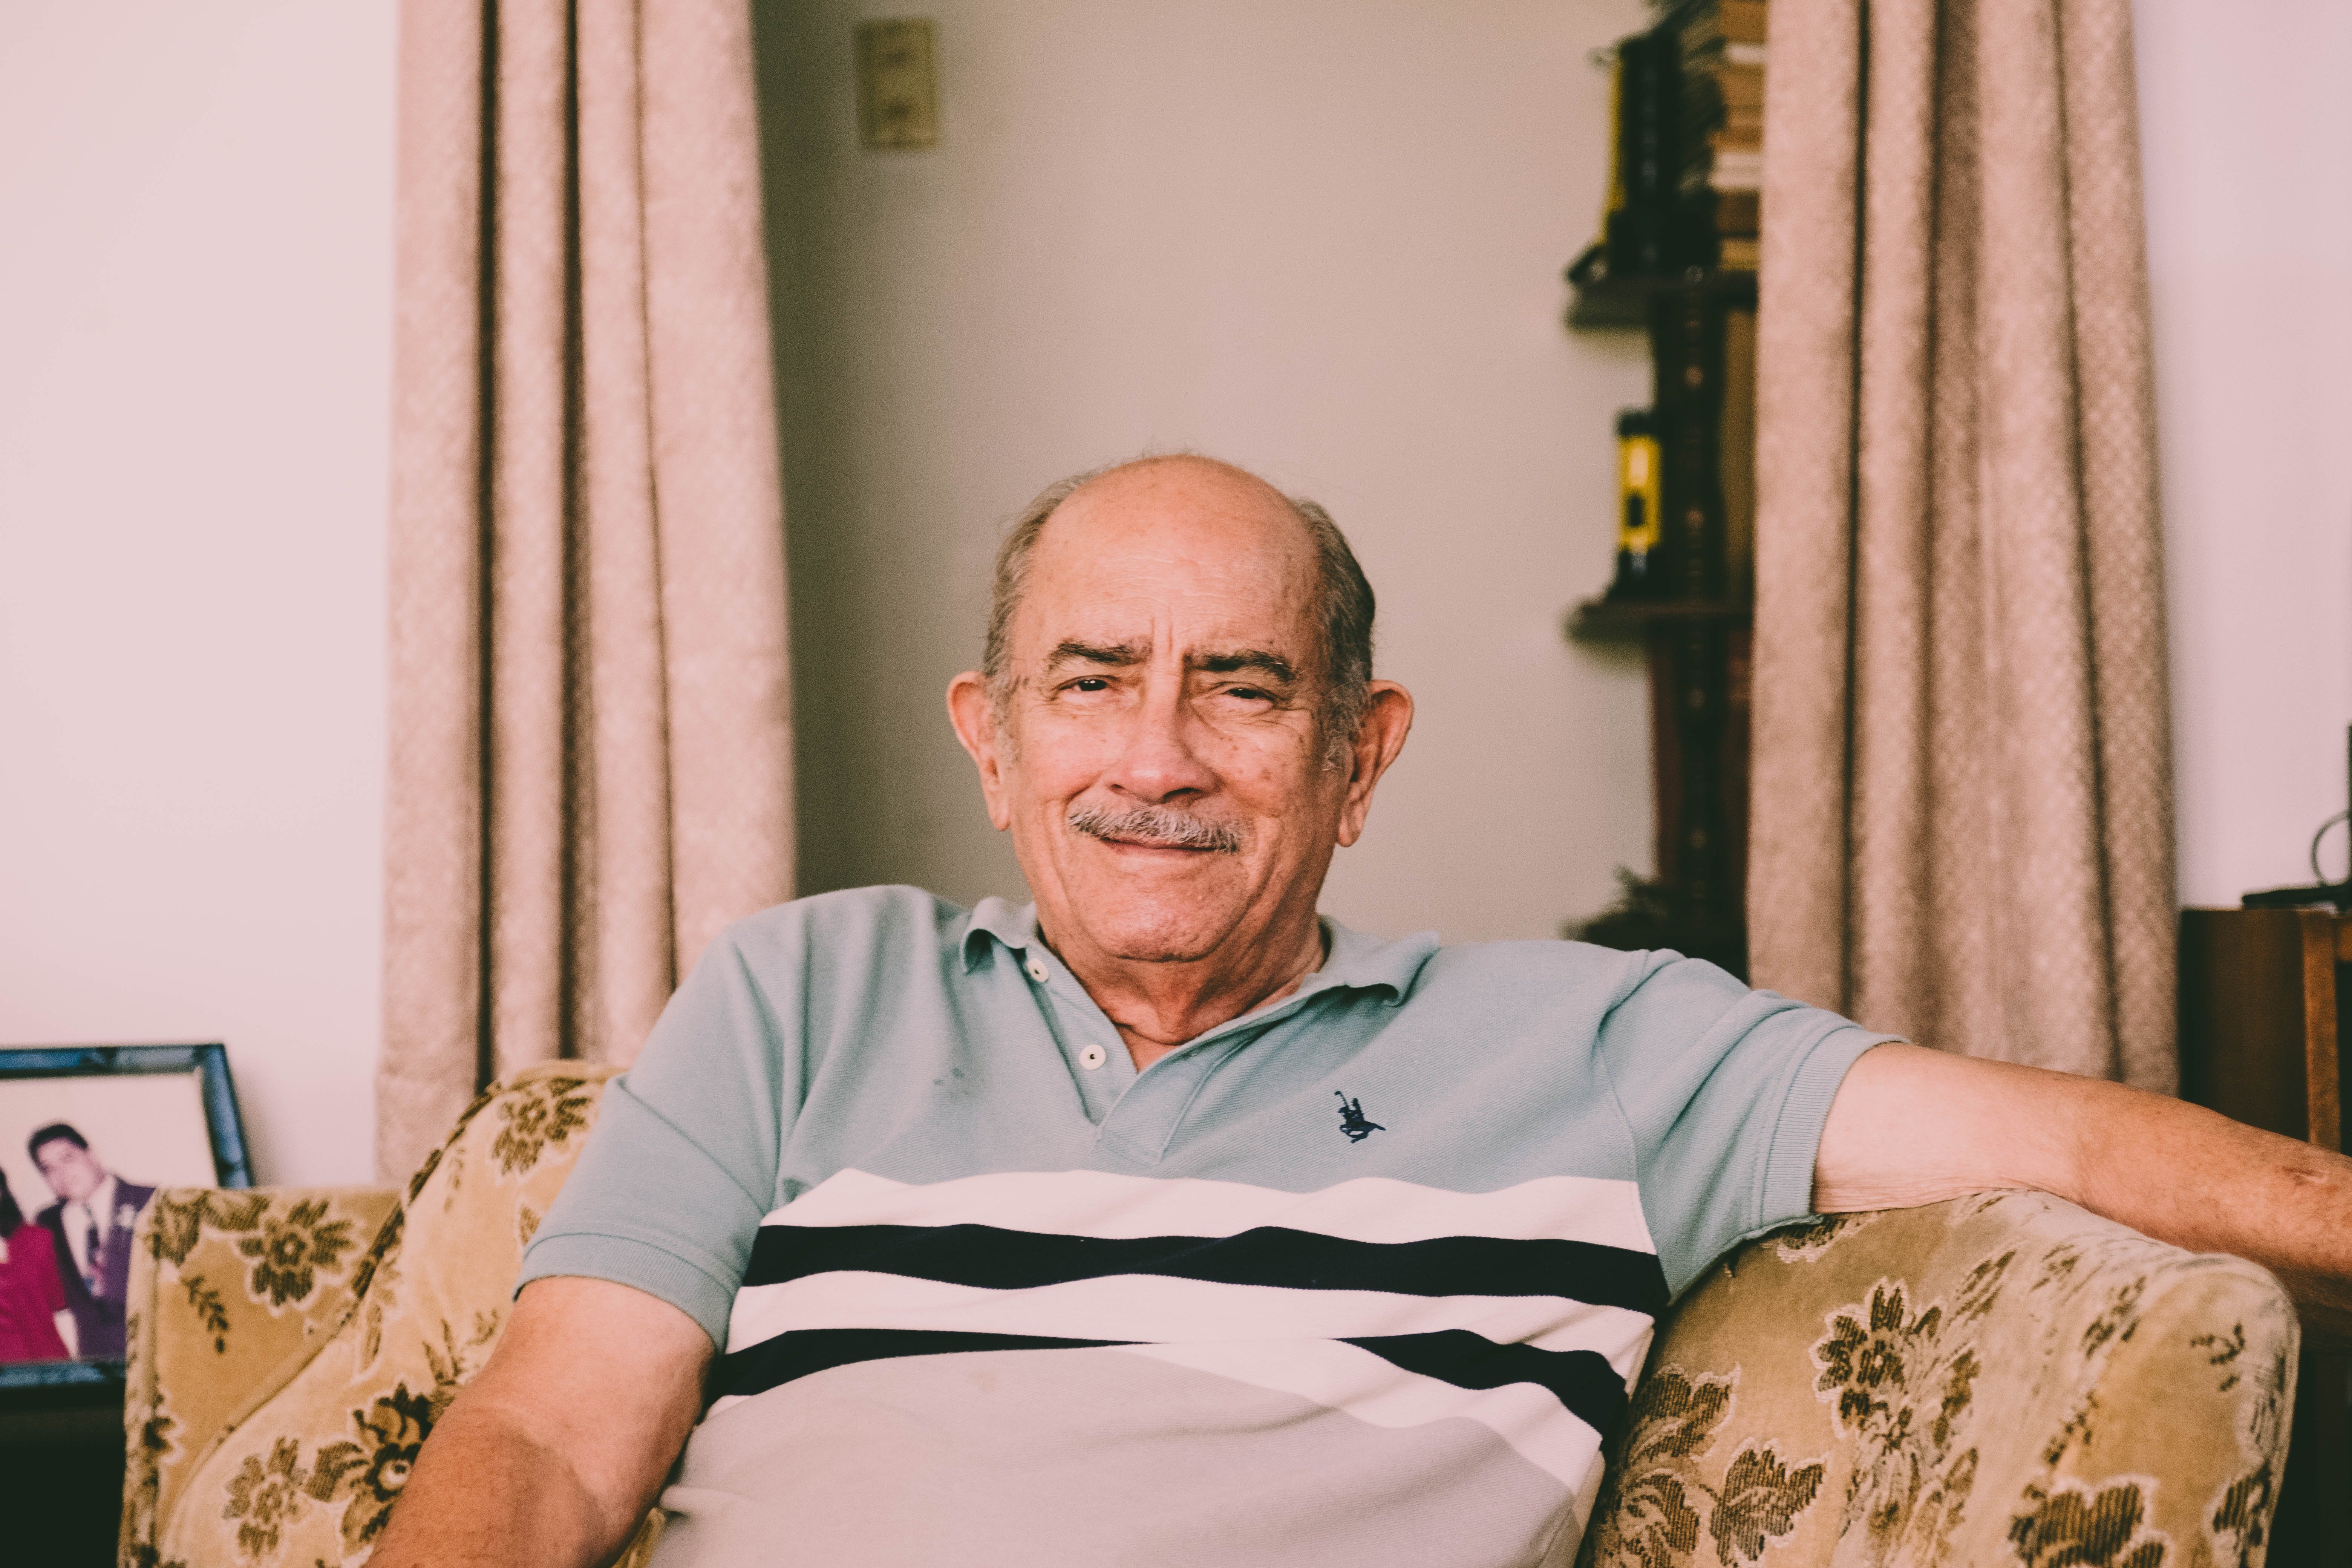 An elderly man sitting on a couch. | Photo: Pexels